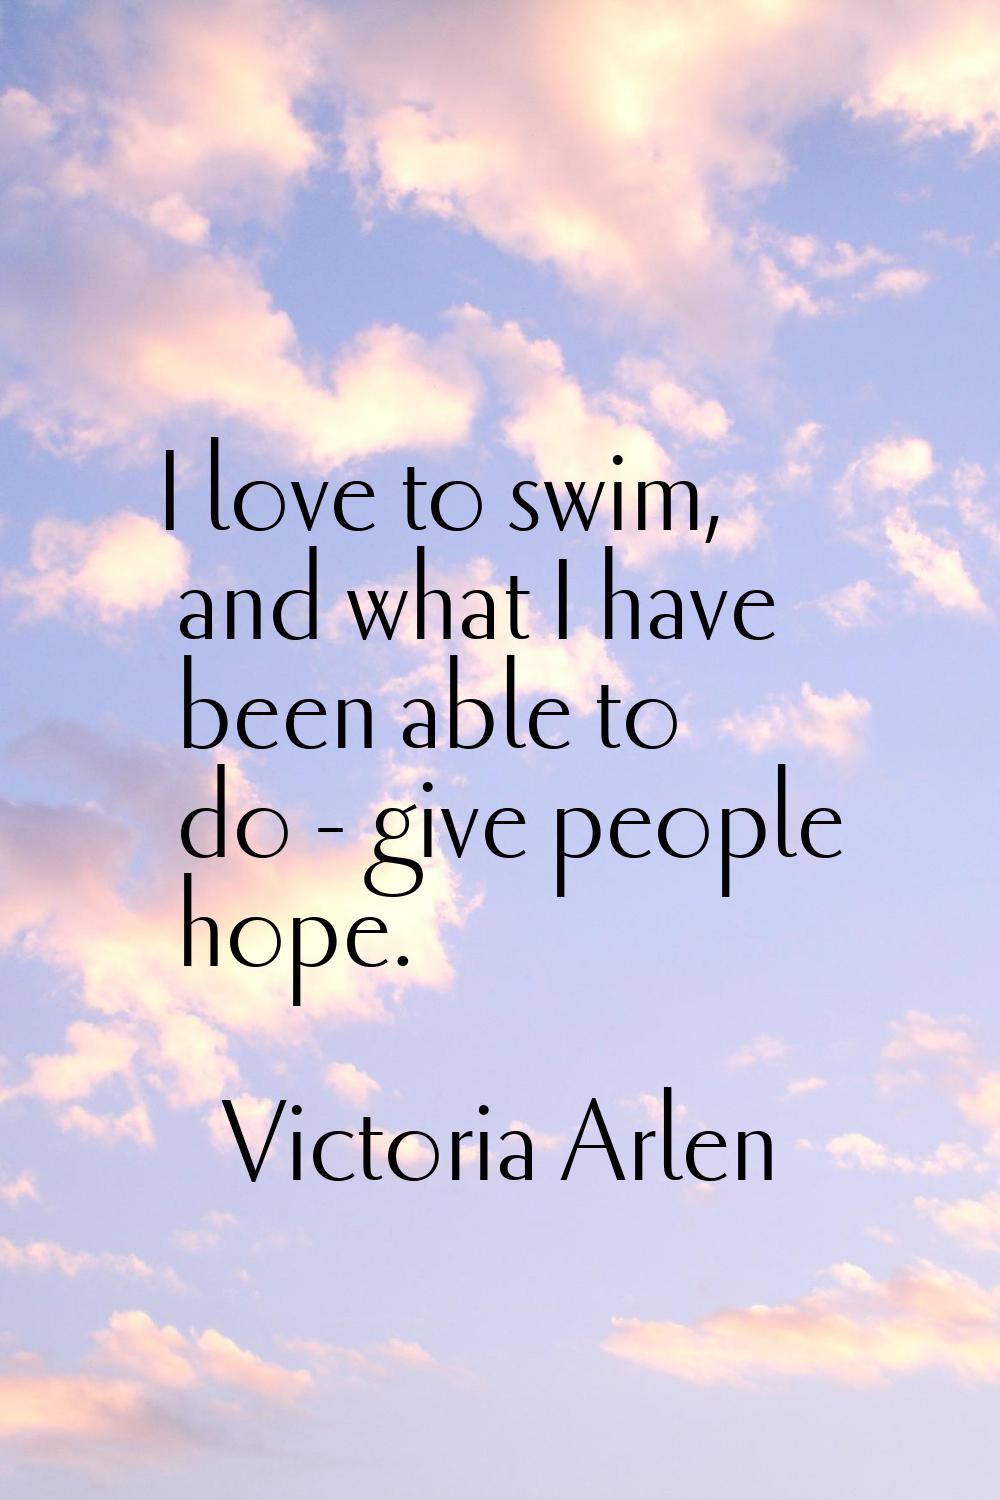 I love to swim, and what I have been able to do - give people hope.